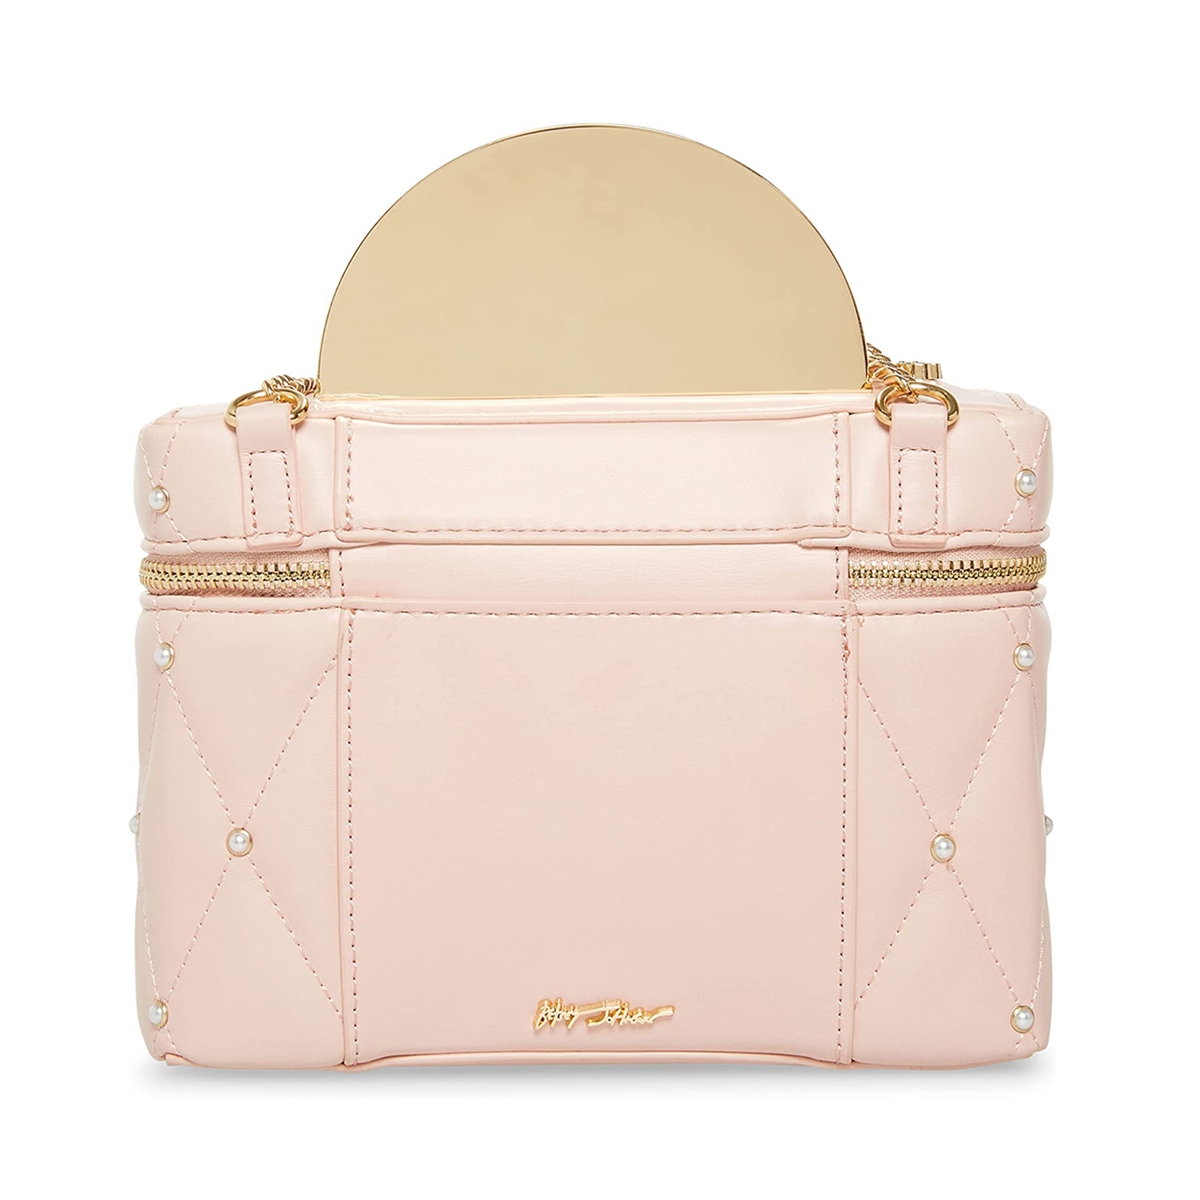 All Handbags  Crossbodies, Shoulder Bags, Clutches, Totes, Satchels &  Kitsch – Betsey Johnson